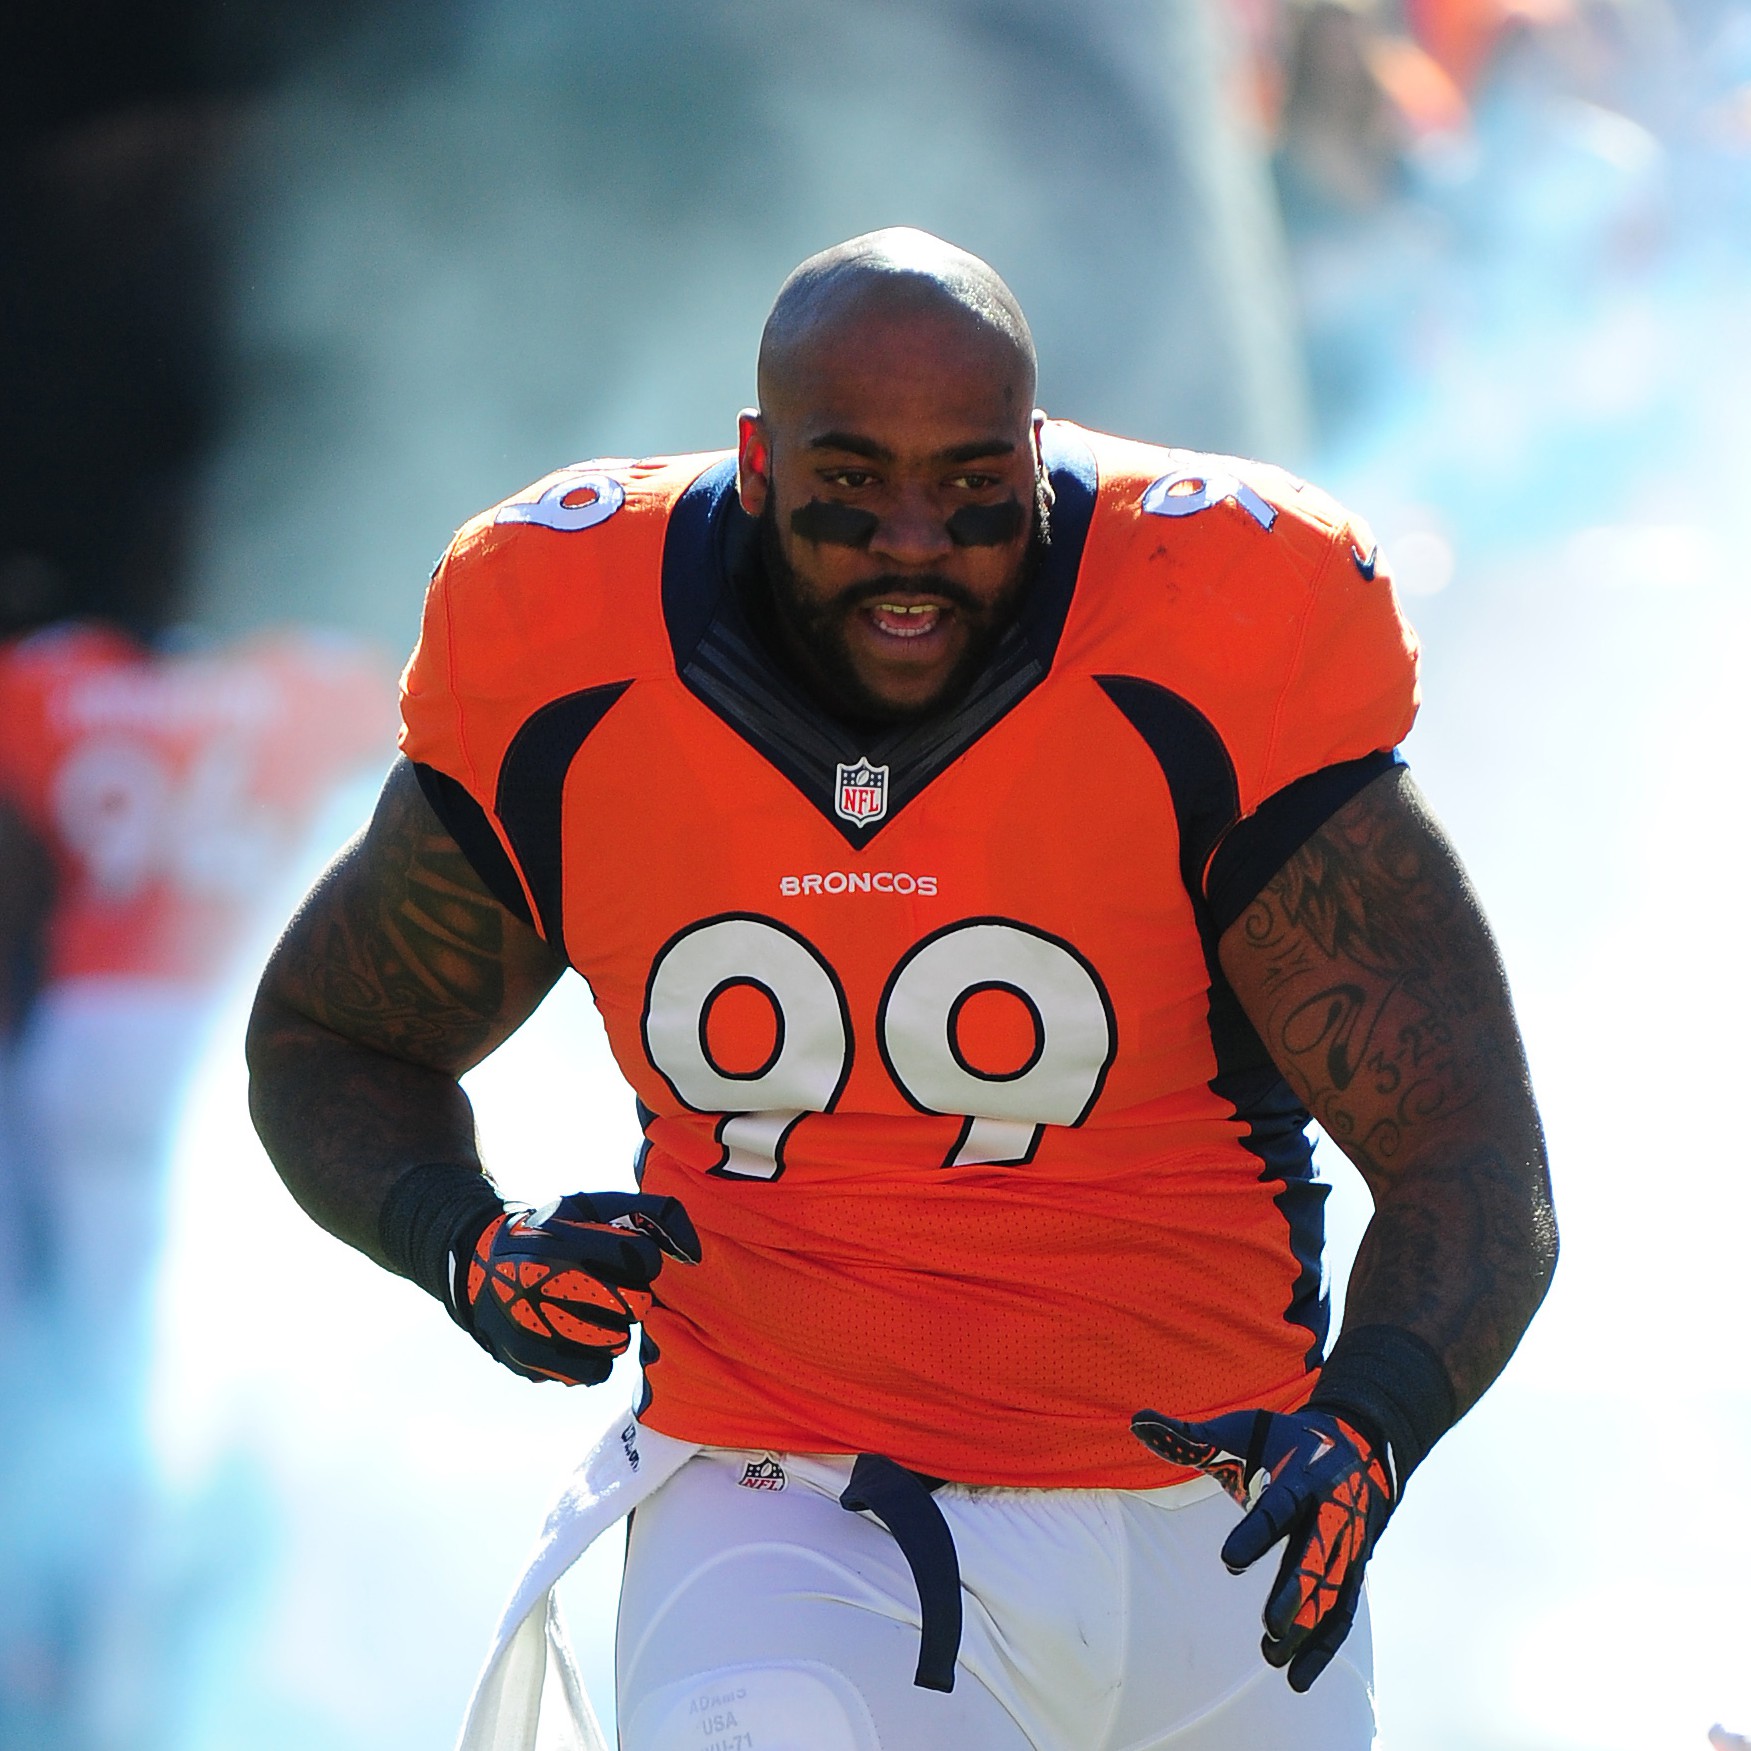 In a column written Monday by Paul Klee of the Colorado Springs Gazette, Broncos defensive tackle Kevin Vickerson voiced his dislike for the